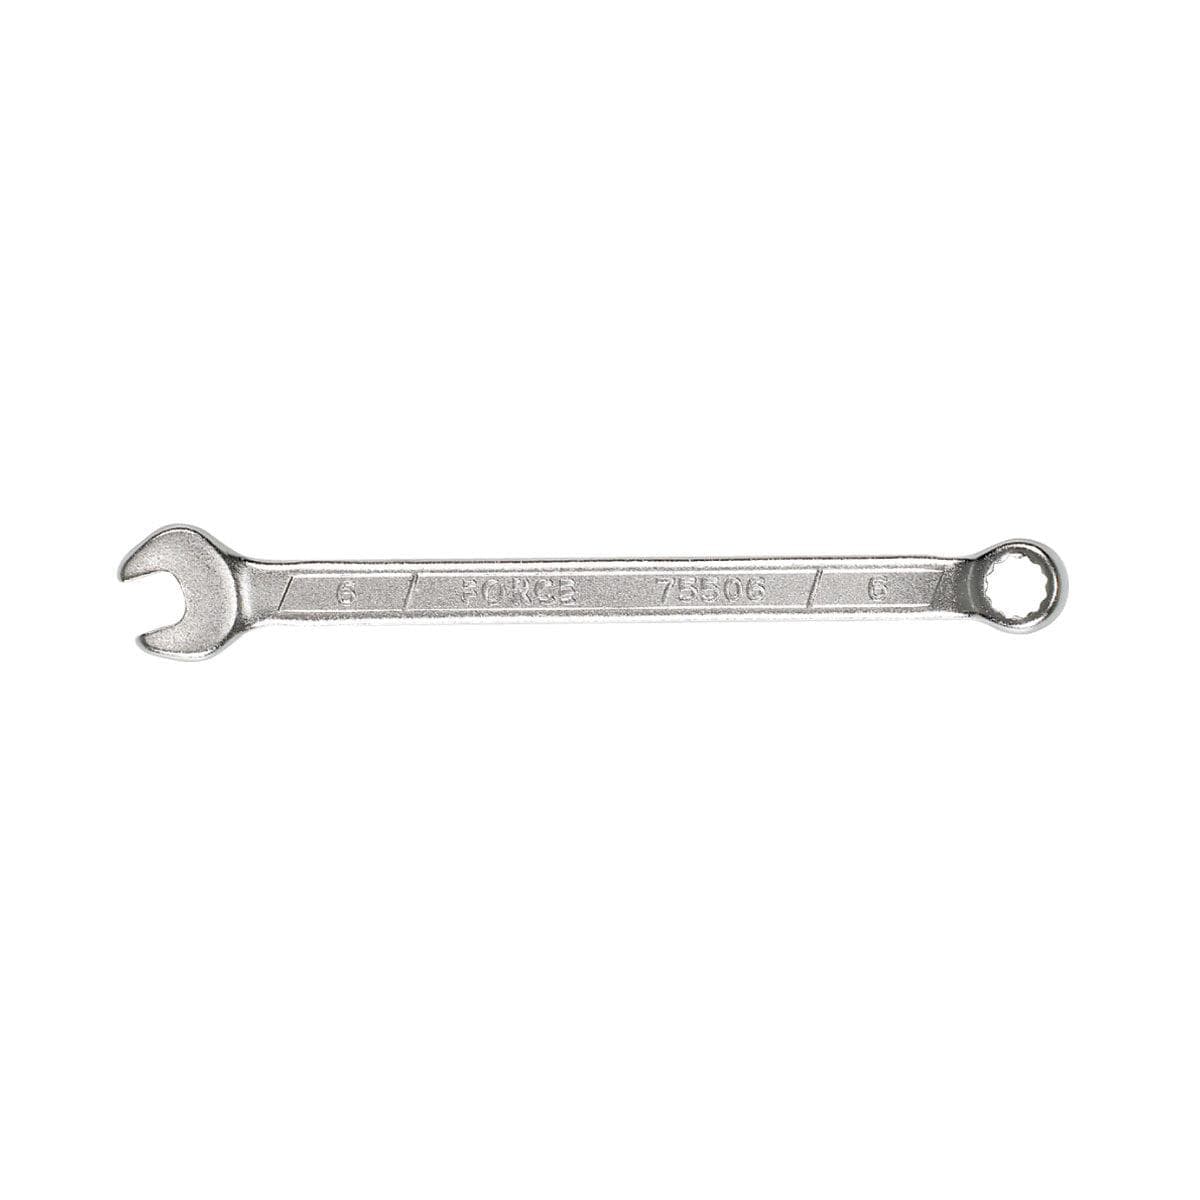 Cyclo 8Mm Spanner: